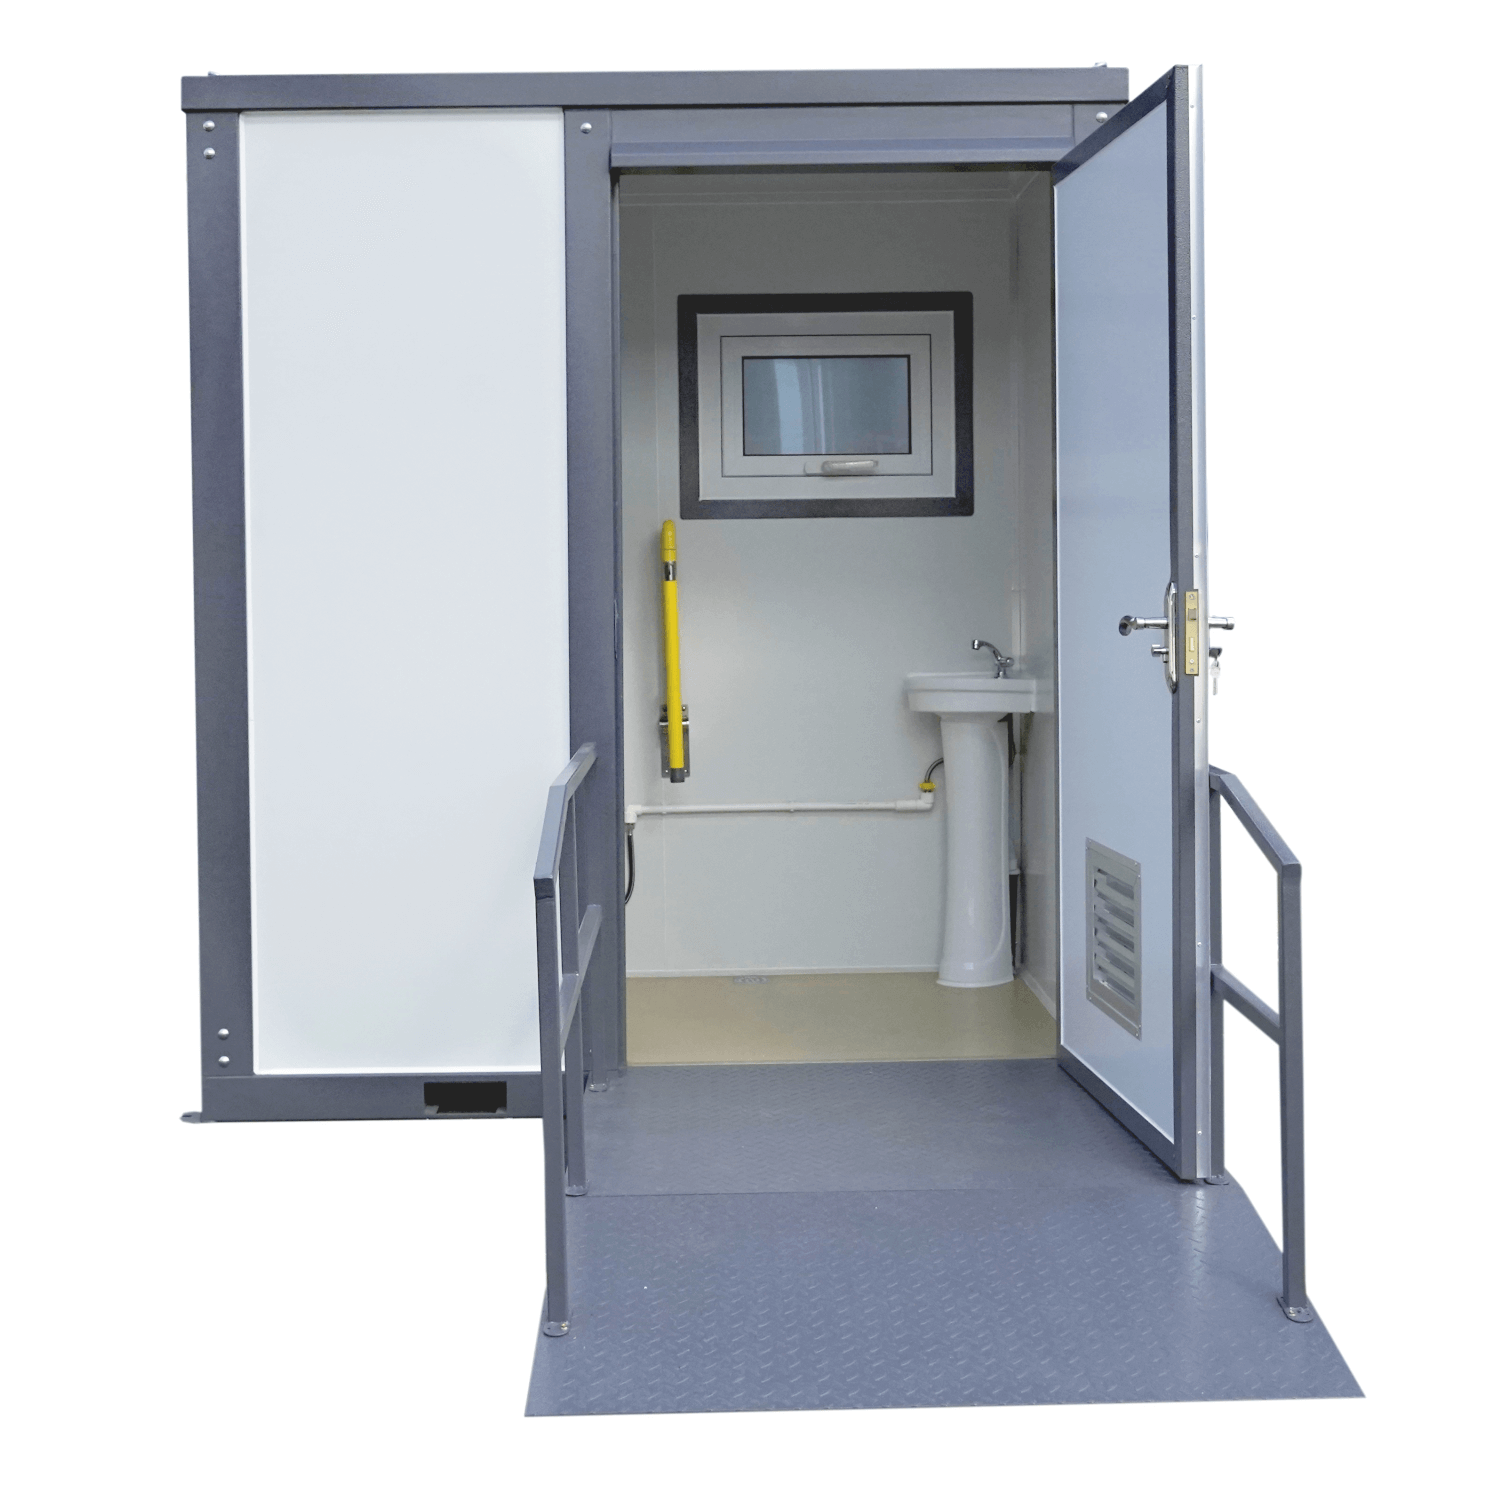 [AS-IS] Bastone Handicap-Accessible Portable Restroom for Disabled